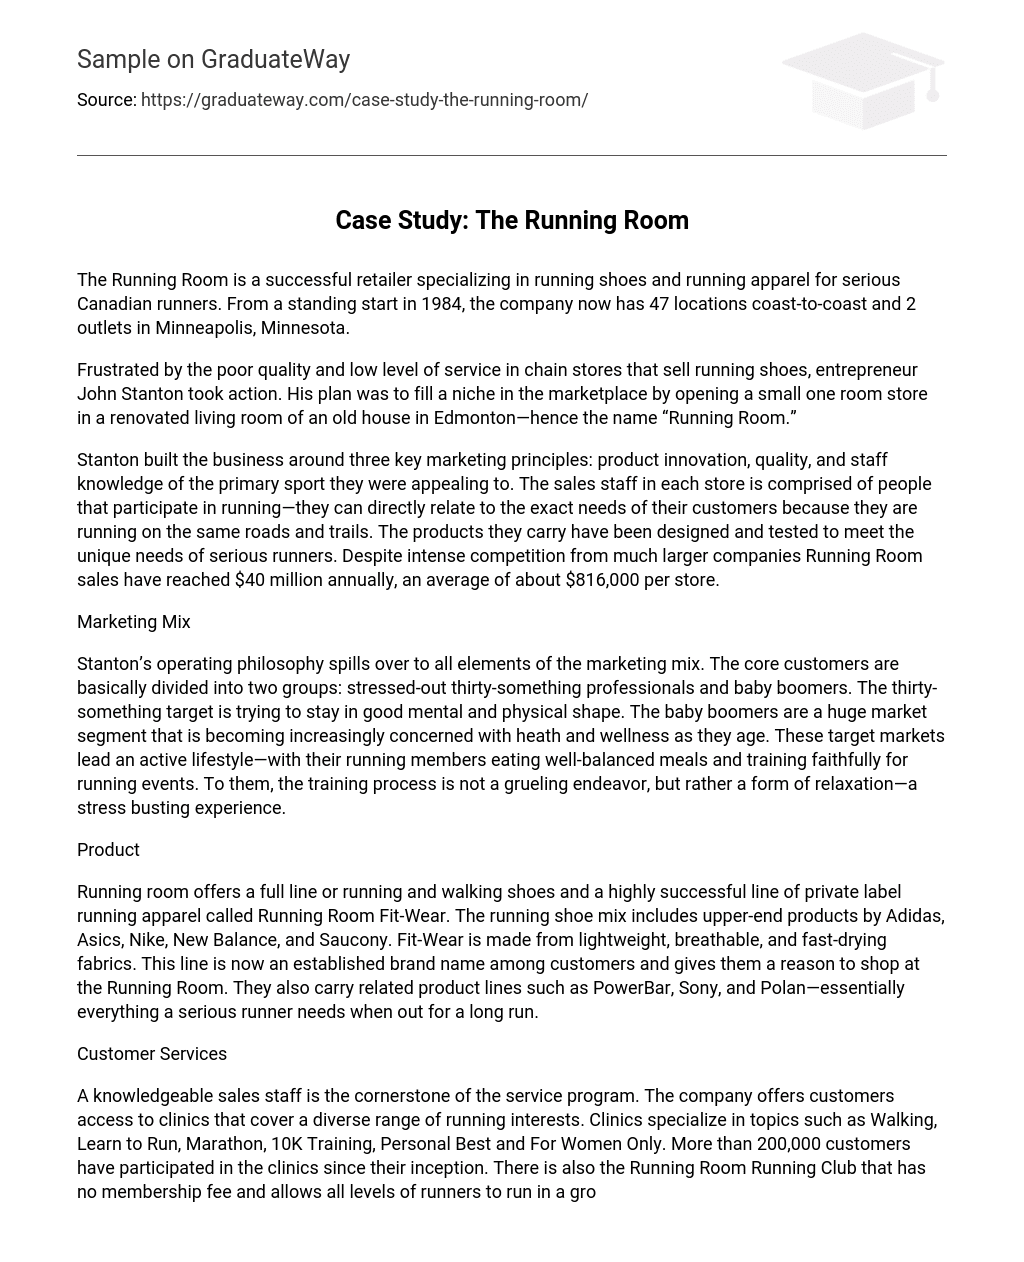 Case Study: The Running Room